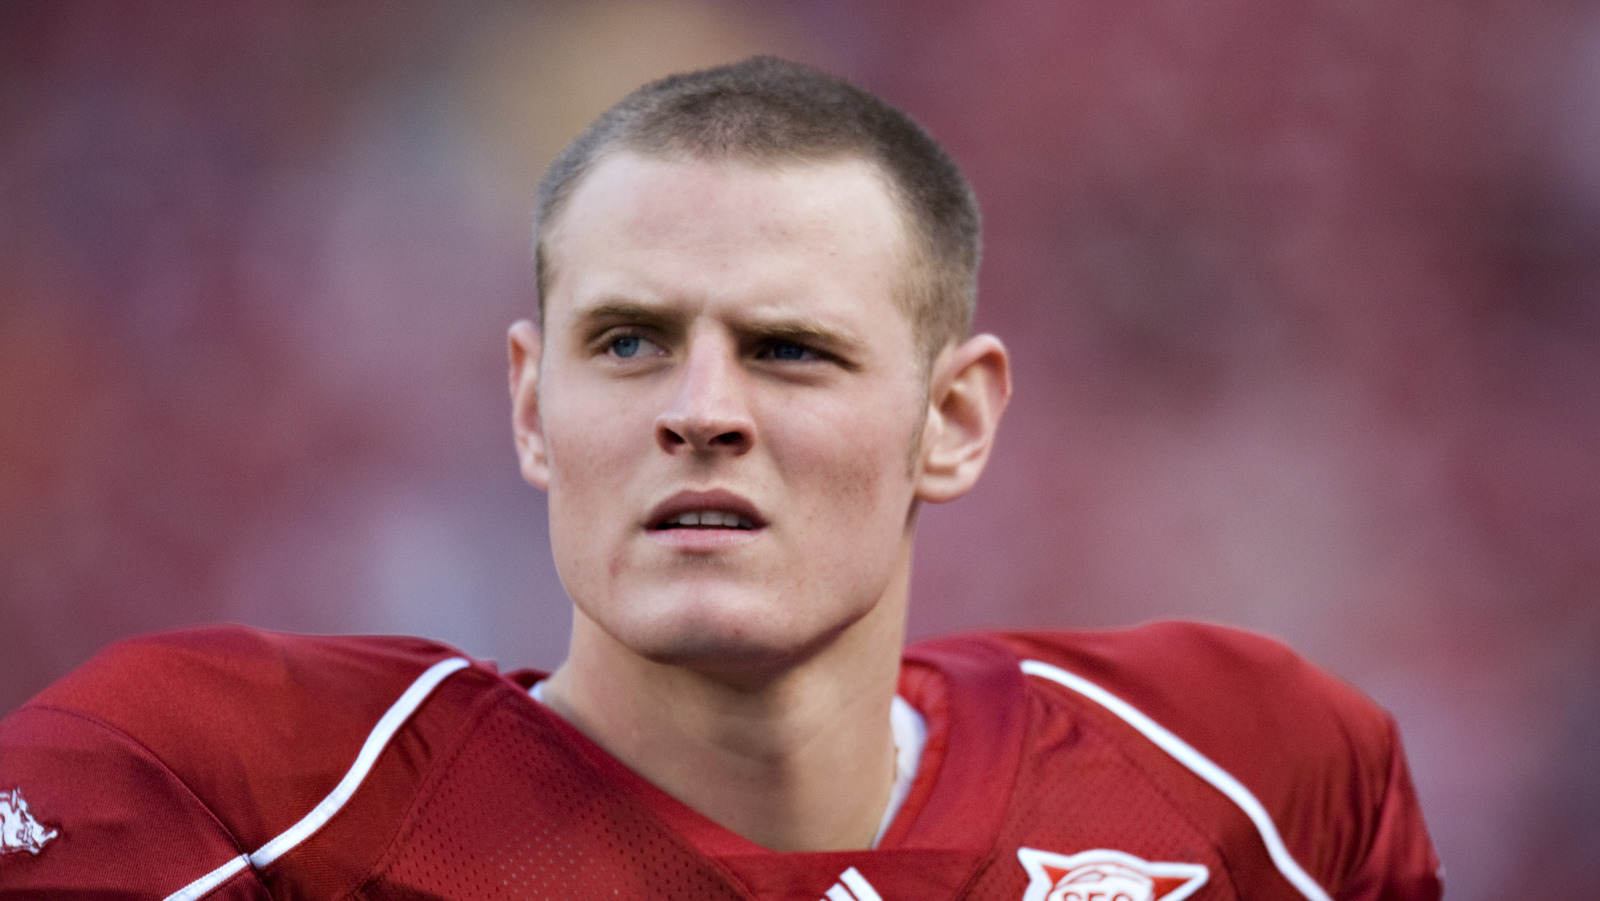 Ryan Mallett Isn T The Only Athlete To Tragically Drown In The Last Decade